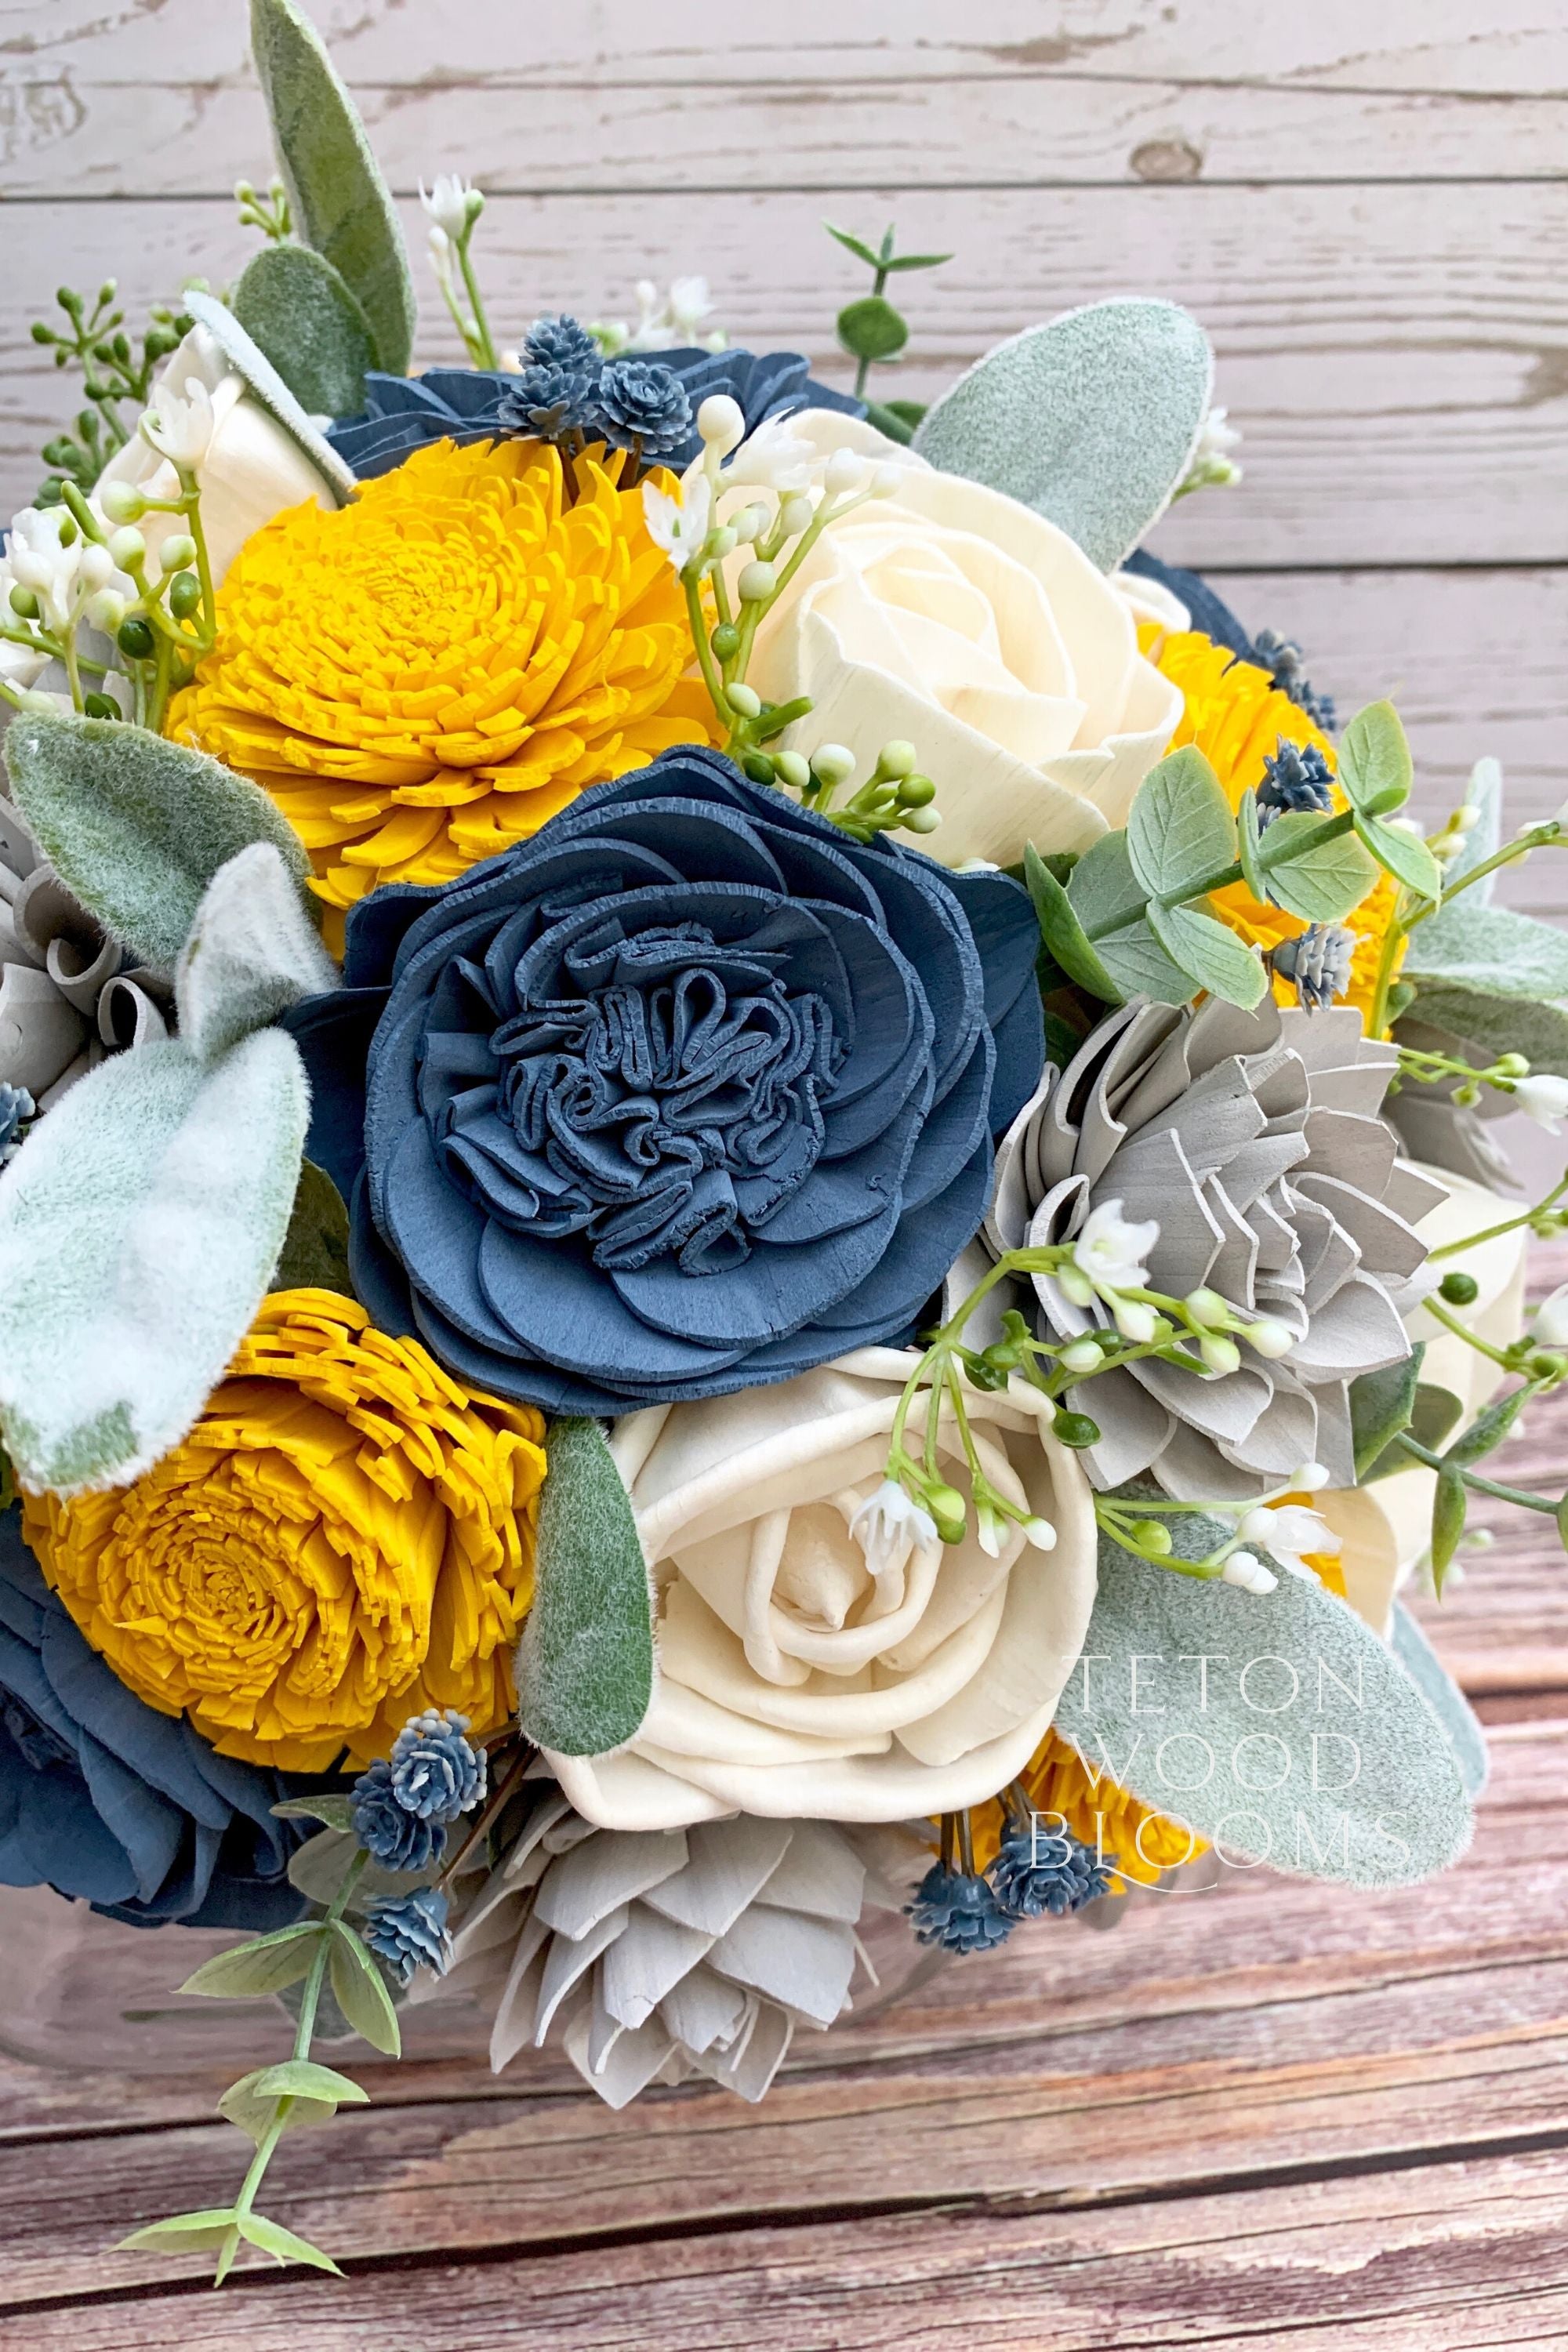 Rustic Blue, Gray and Yellow Bouquet